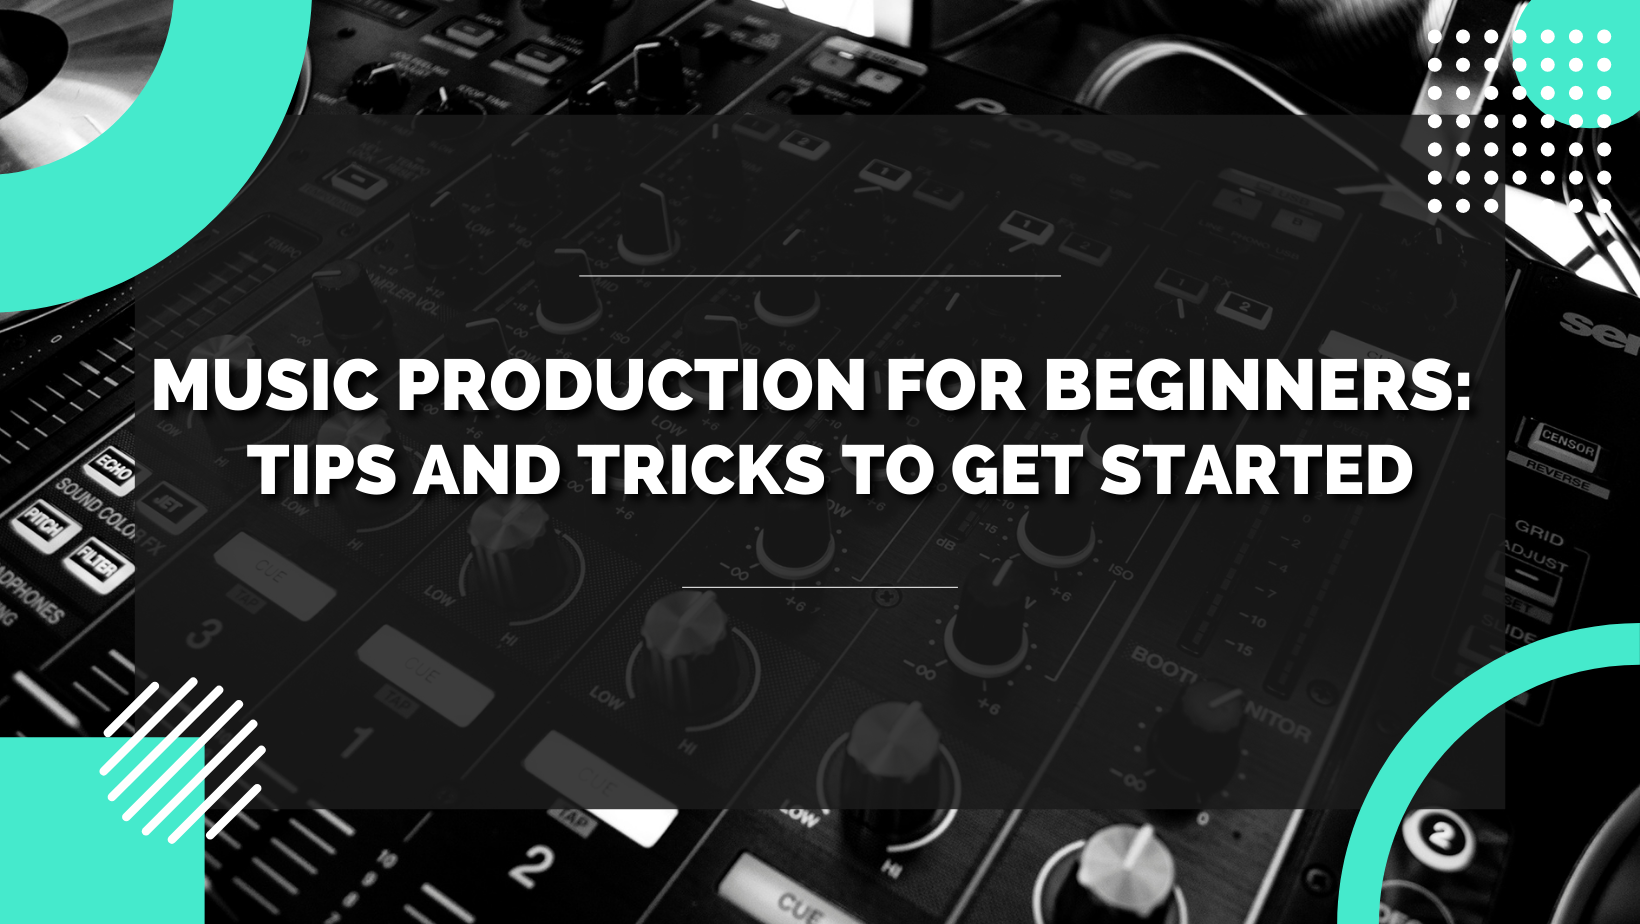 Music Production for Beginners Tips and Tricks to Get Started